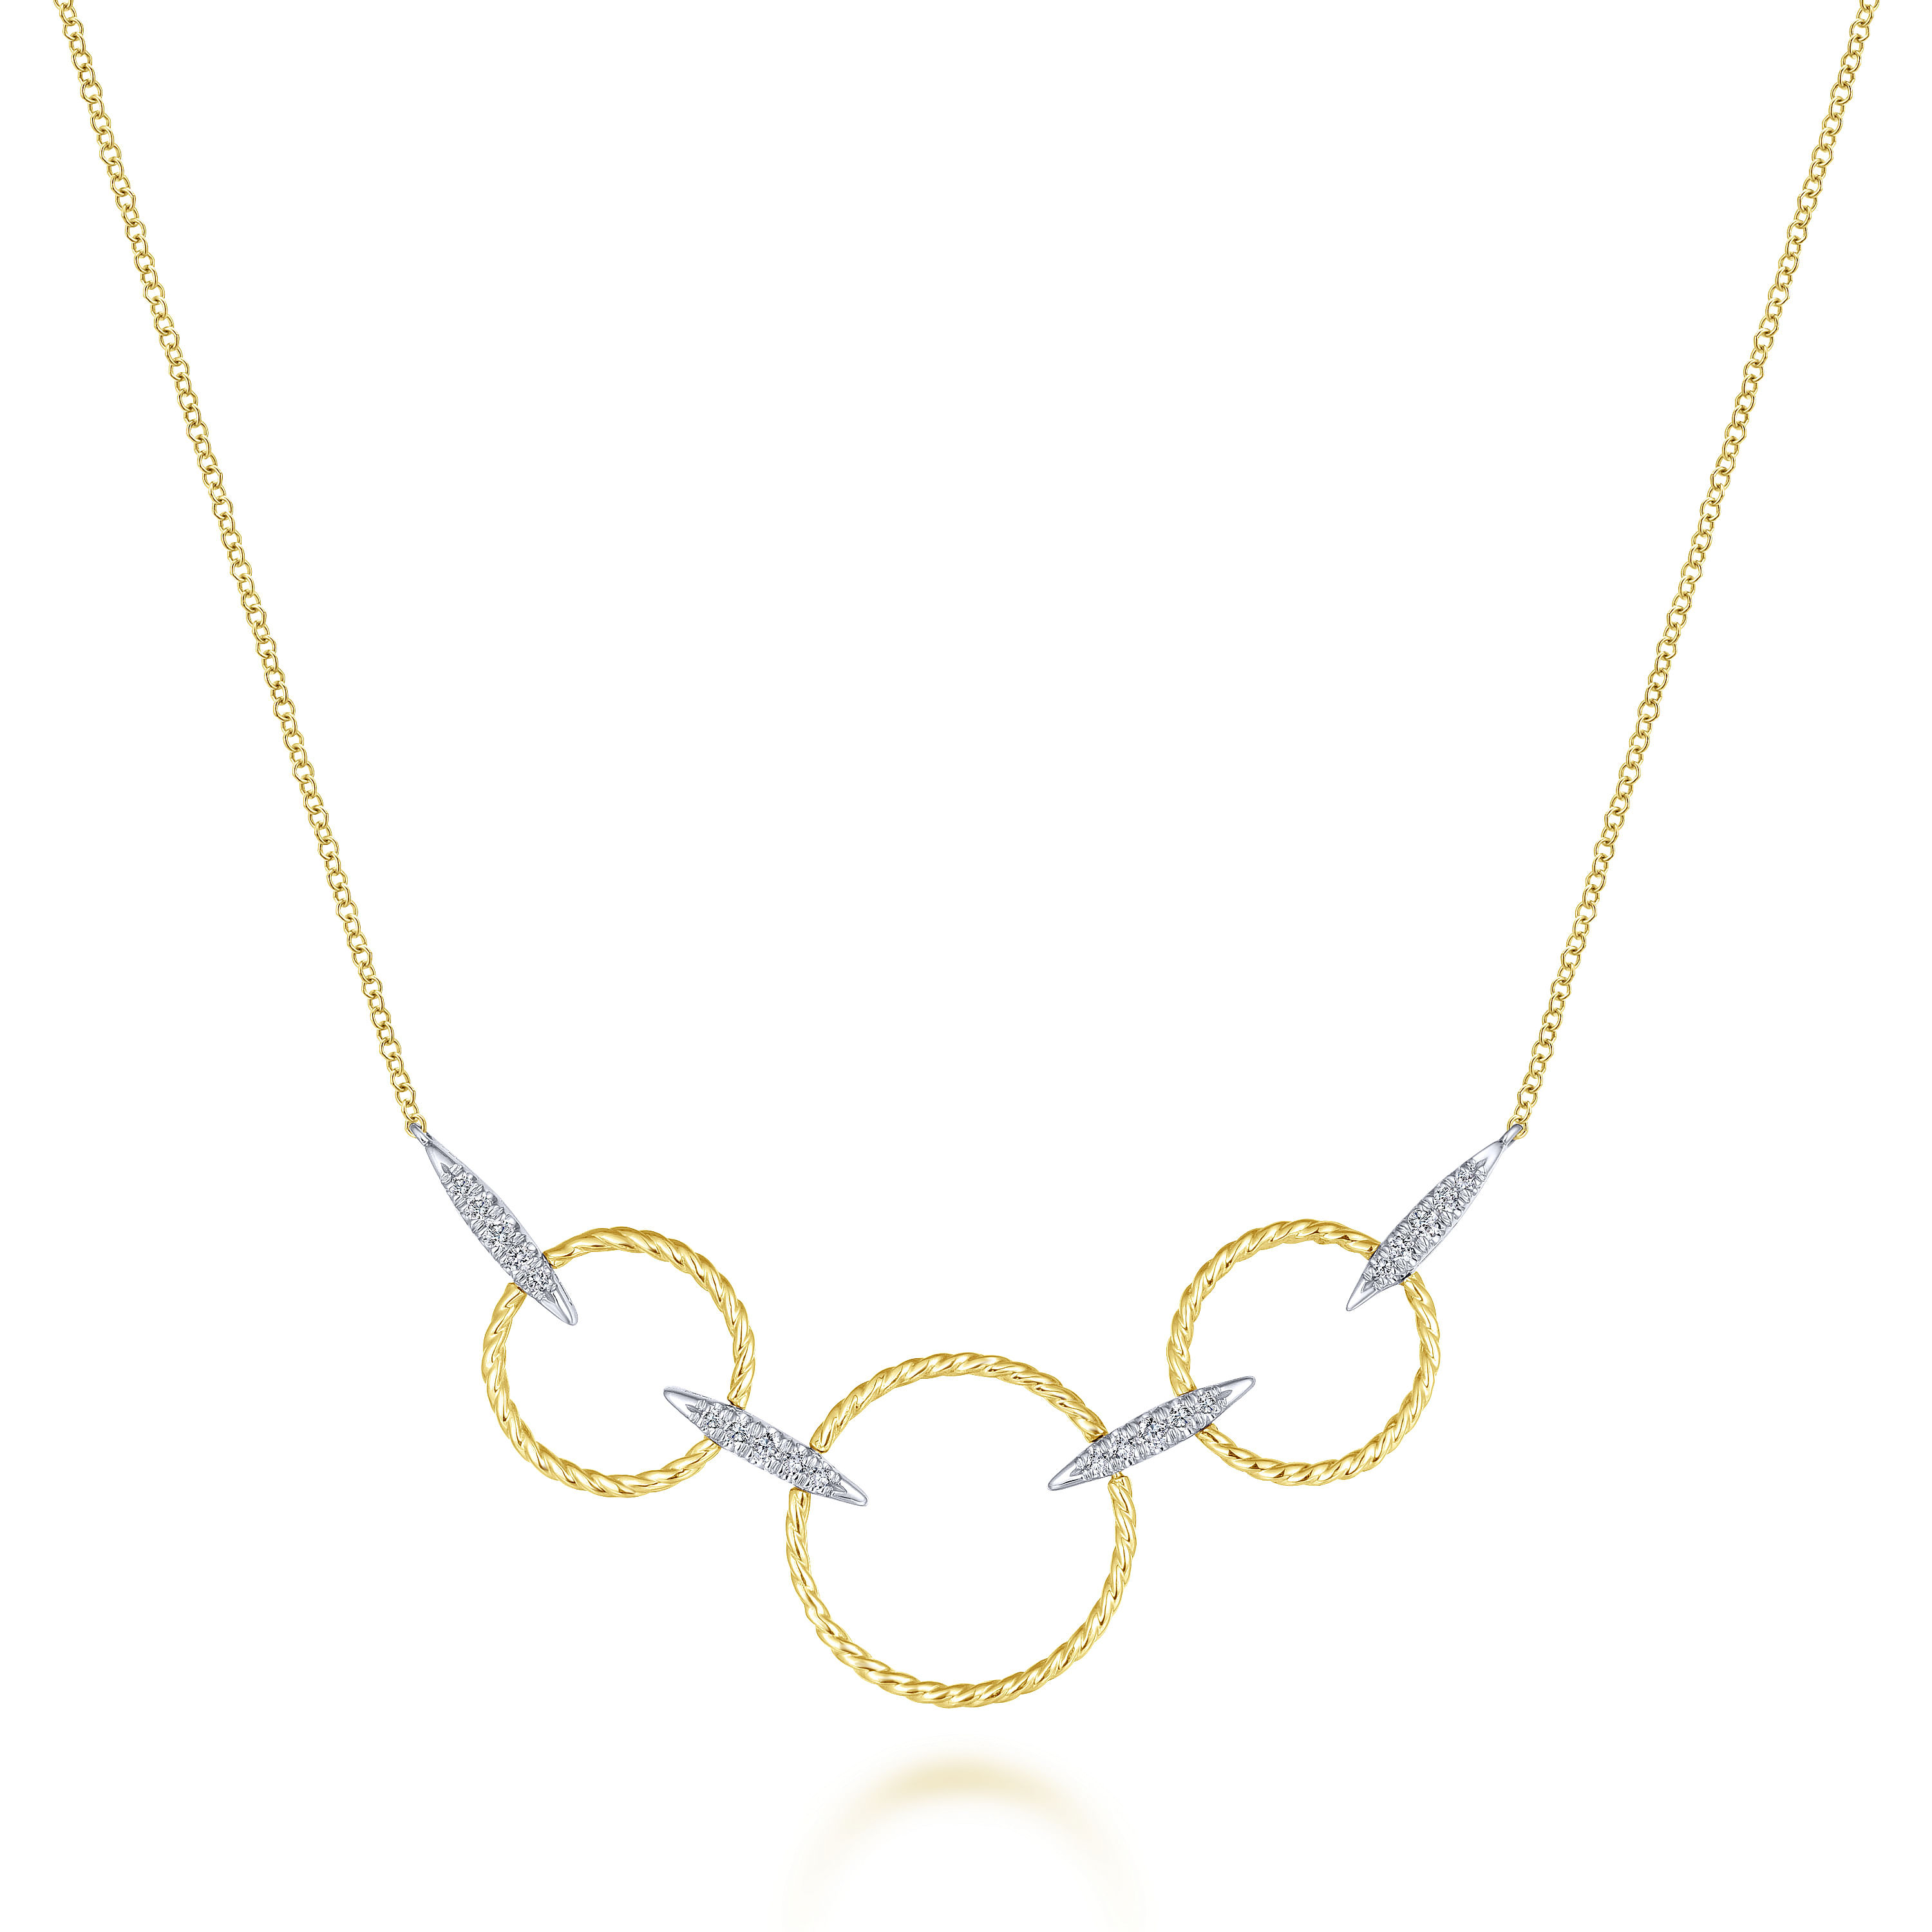 14K Yellow-White Gold Triple Loop Necklace with Diamond Connectors